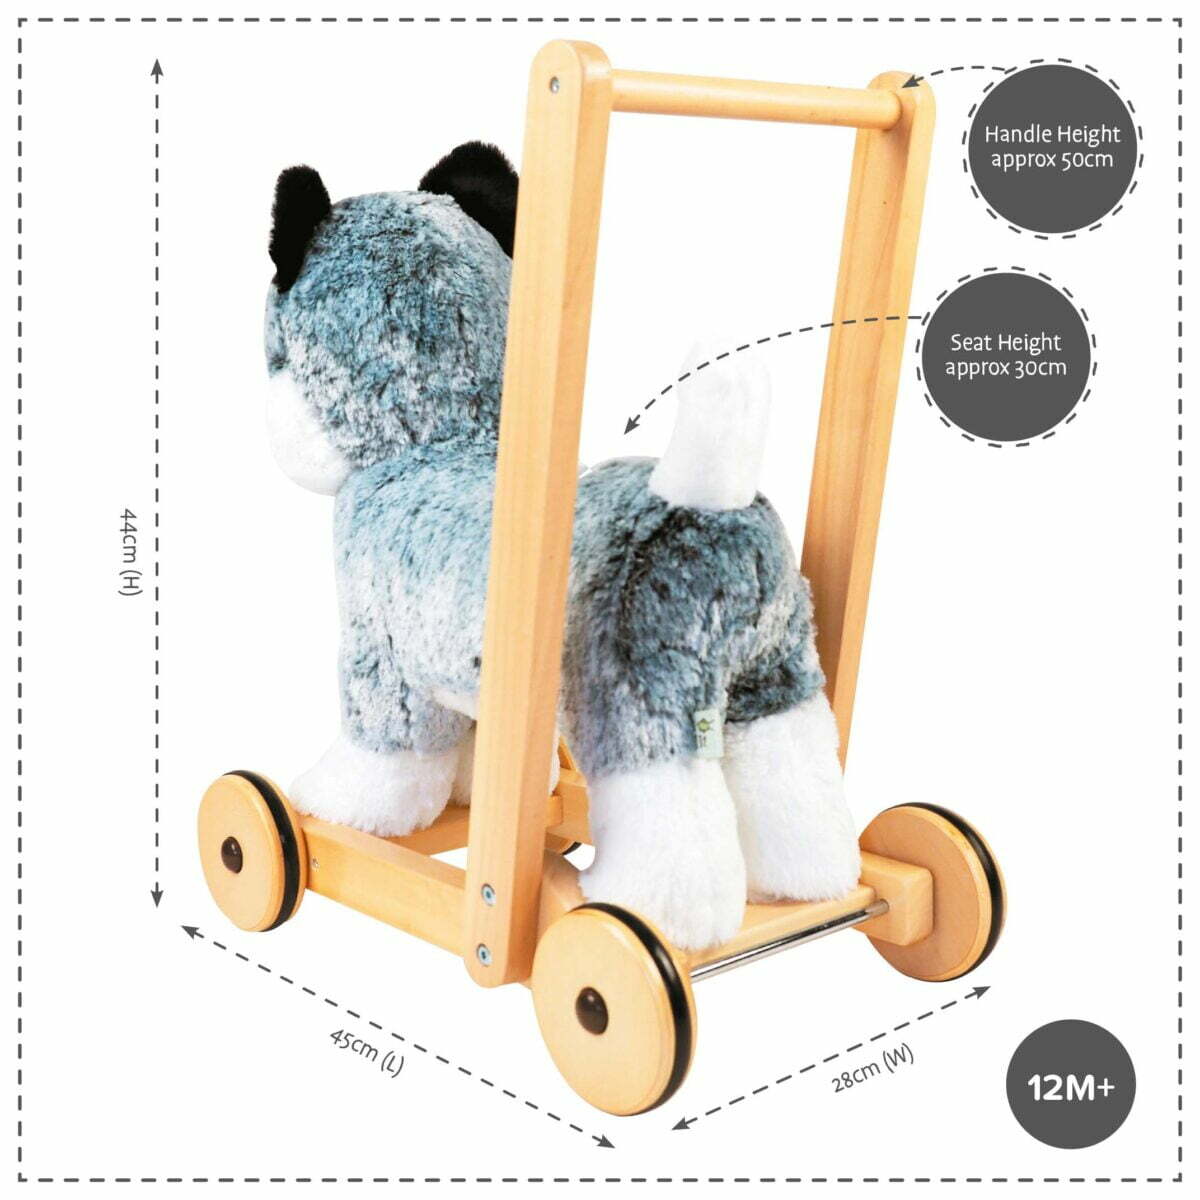 Product dimensions displayed for Mishka Dog Baby Walker